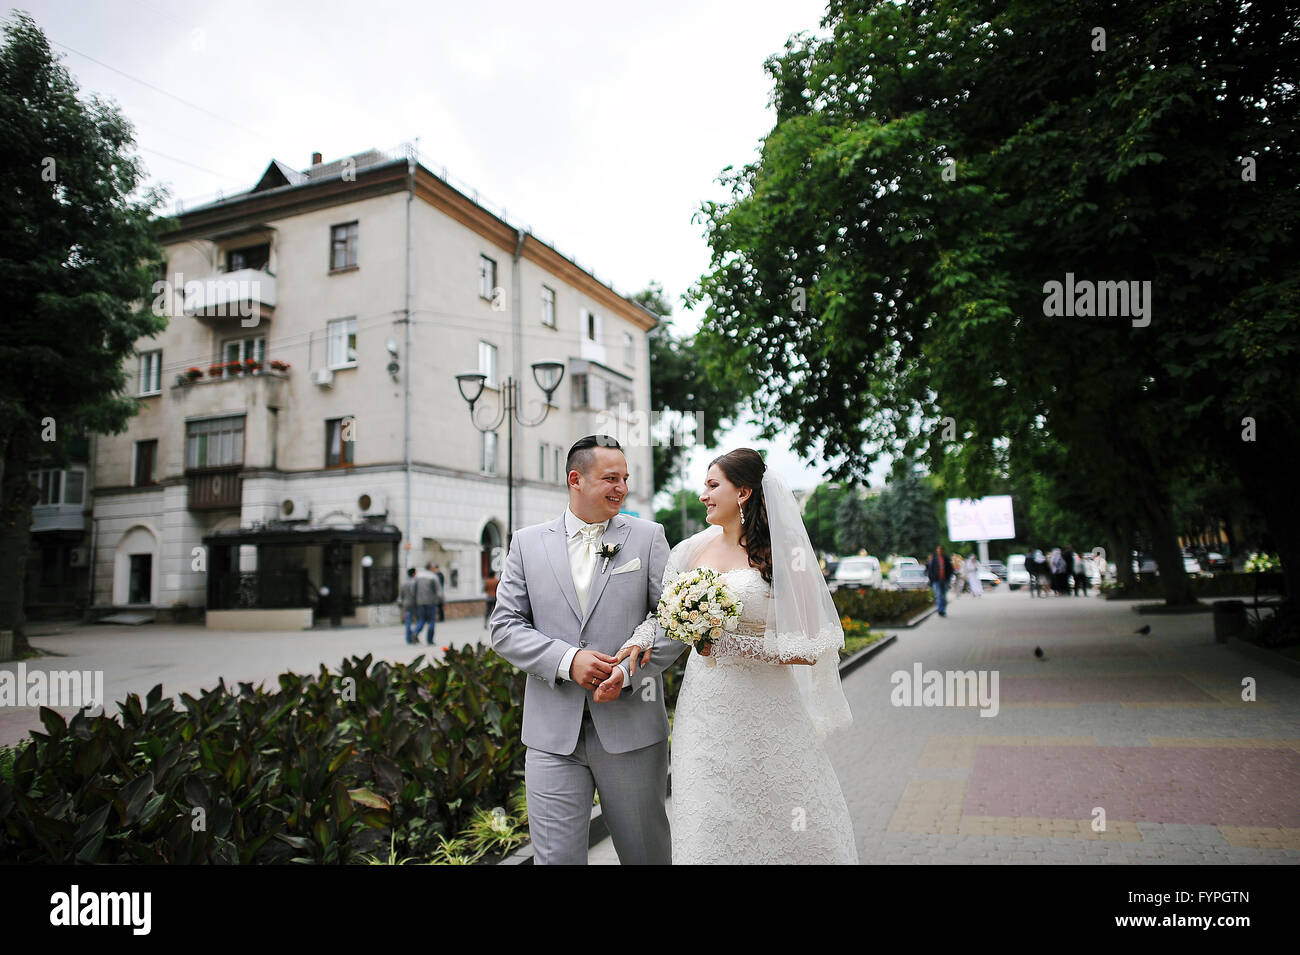 wedding couple walling at the city Stock Photo